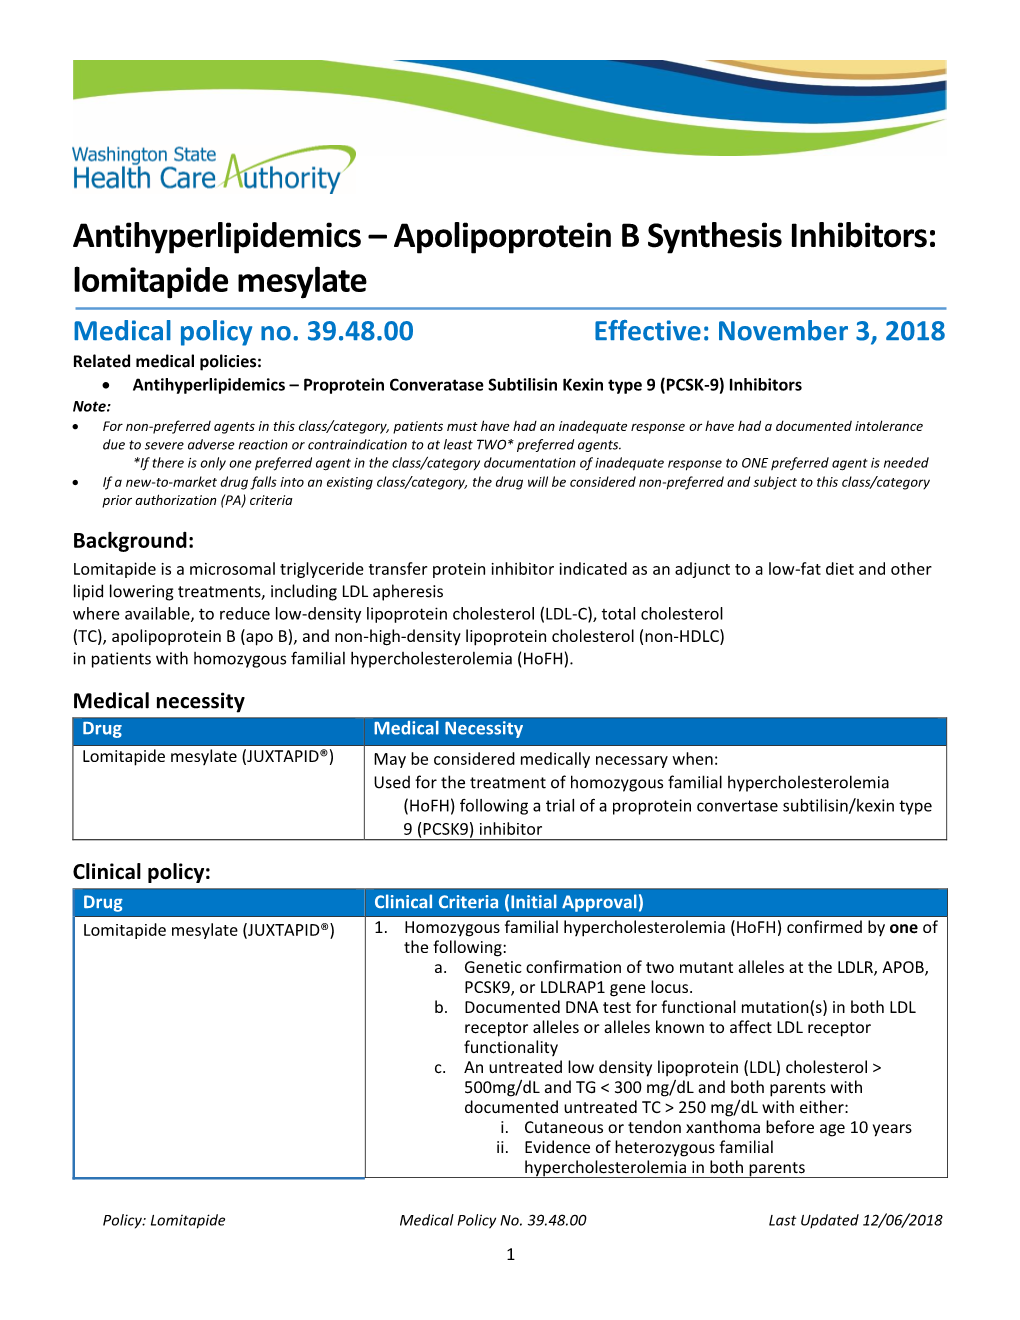 Antihyperlipidemics – Apolipoprotein B Synthesis Inhibitors: Lomitapide Mesylate Medical Policy No